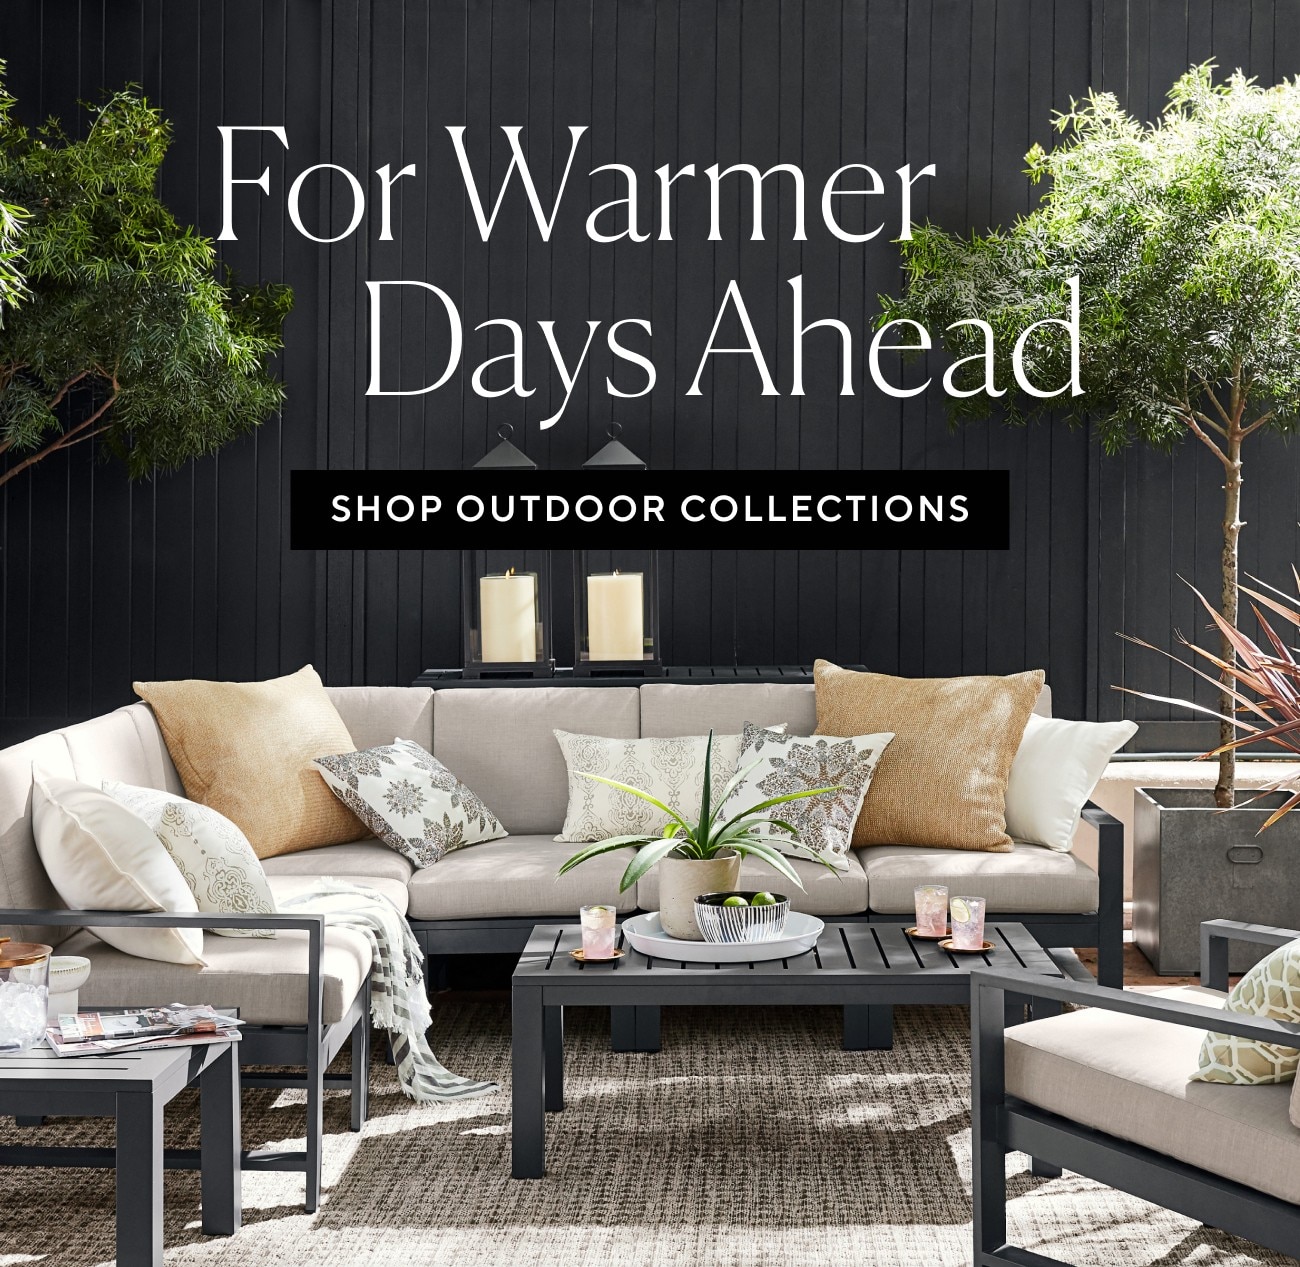  SHOP OUTDOOR COLLECTIONS 